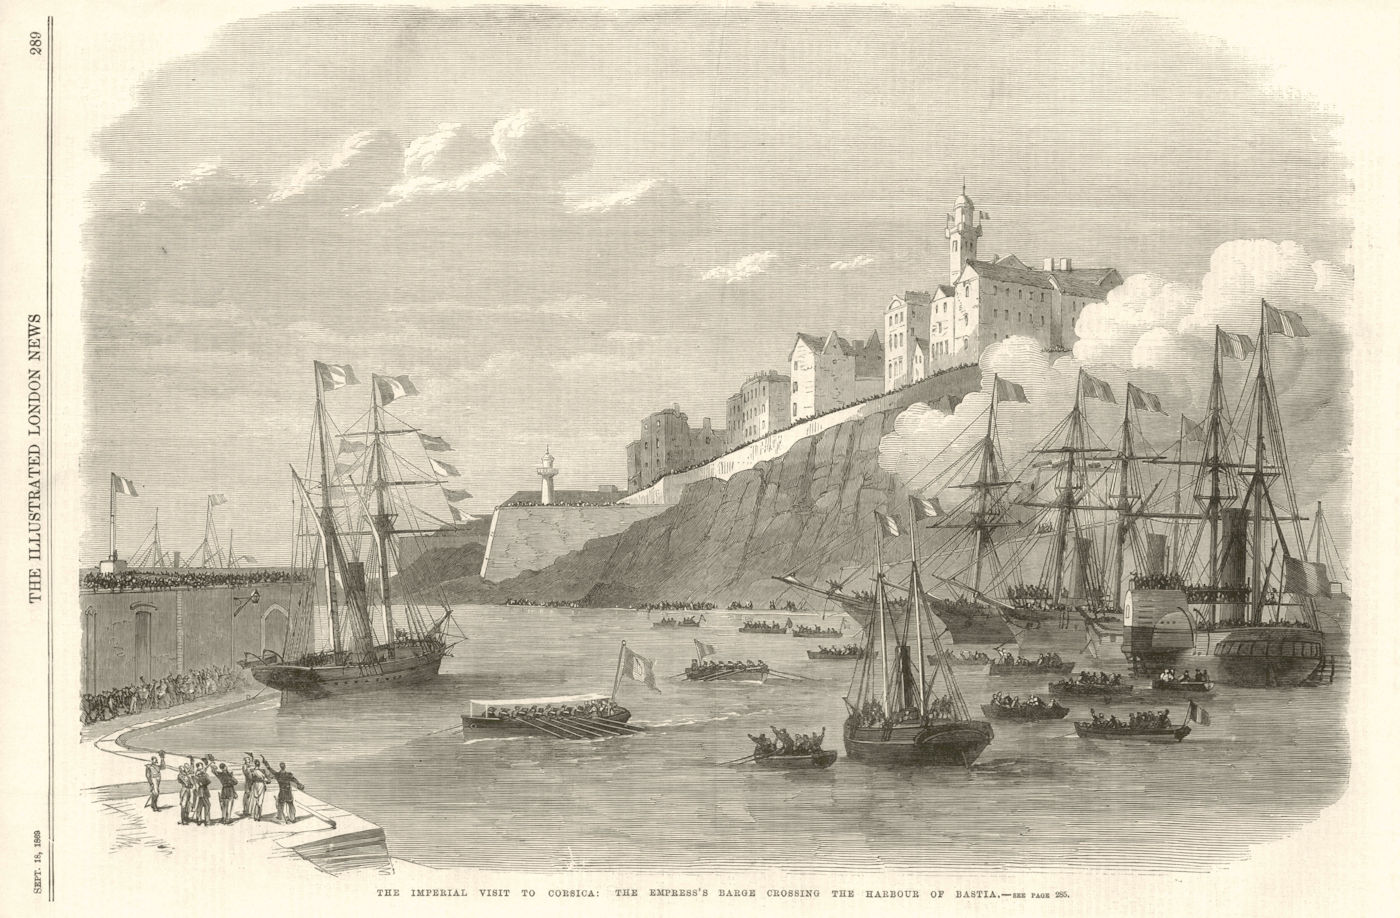 Associate Product The Imperial visit to Corsica: The Empress's barge crossing Bastia harbour 1869